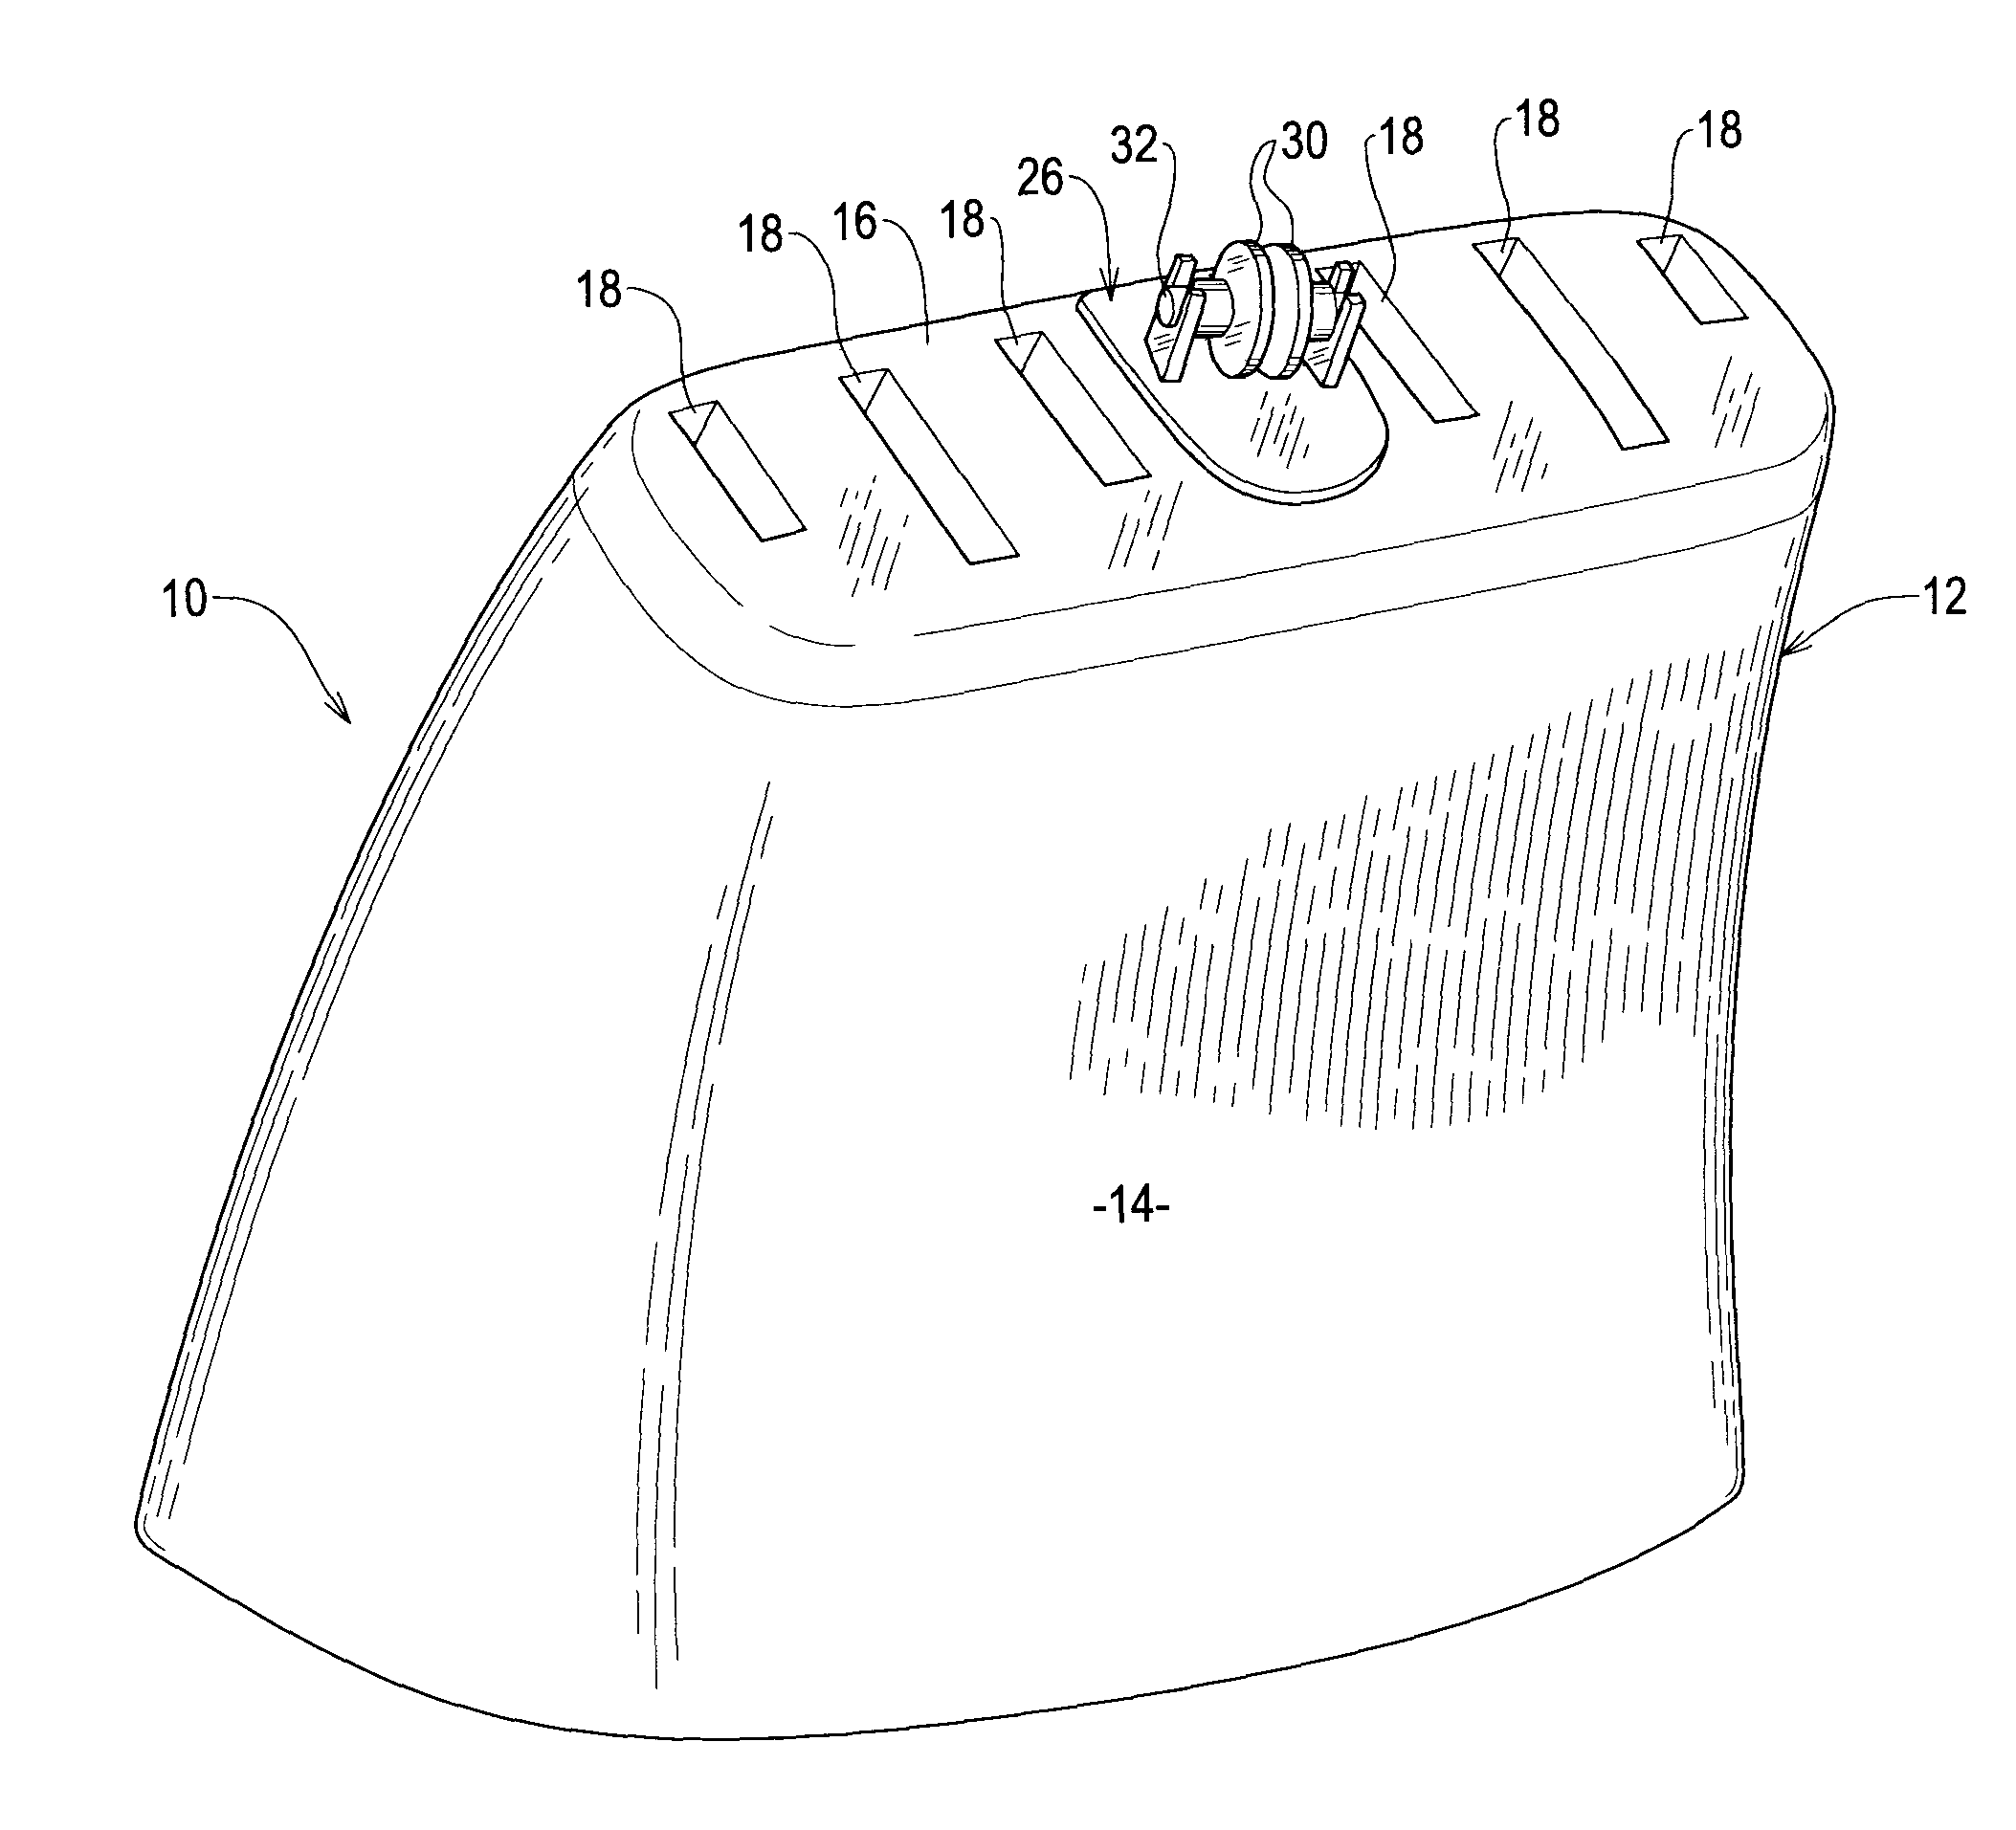 Knife Storage And Sharpening Apparatus